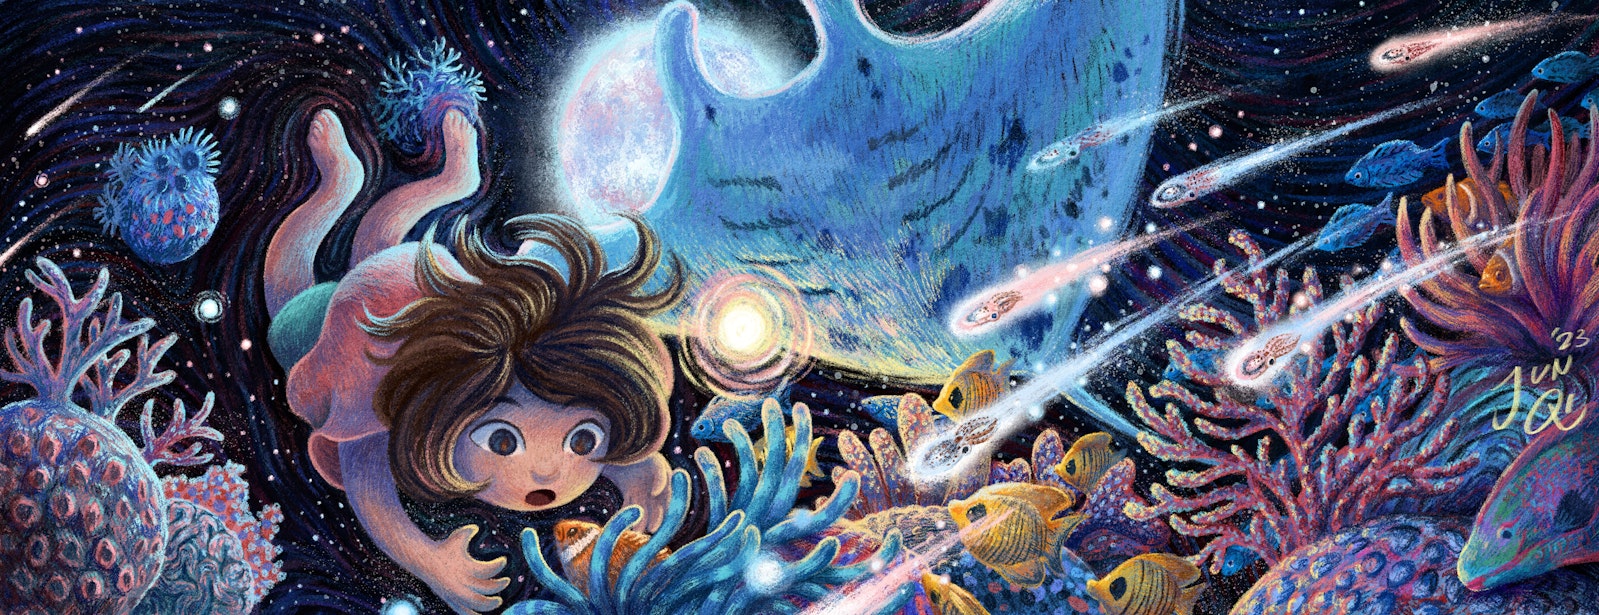 Illustration of a young girl swimming in spacesea and admiring a coral reef, beneath a large full moon. A manta ray swims overhead, and baby squids shoot past like shooting stars